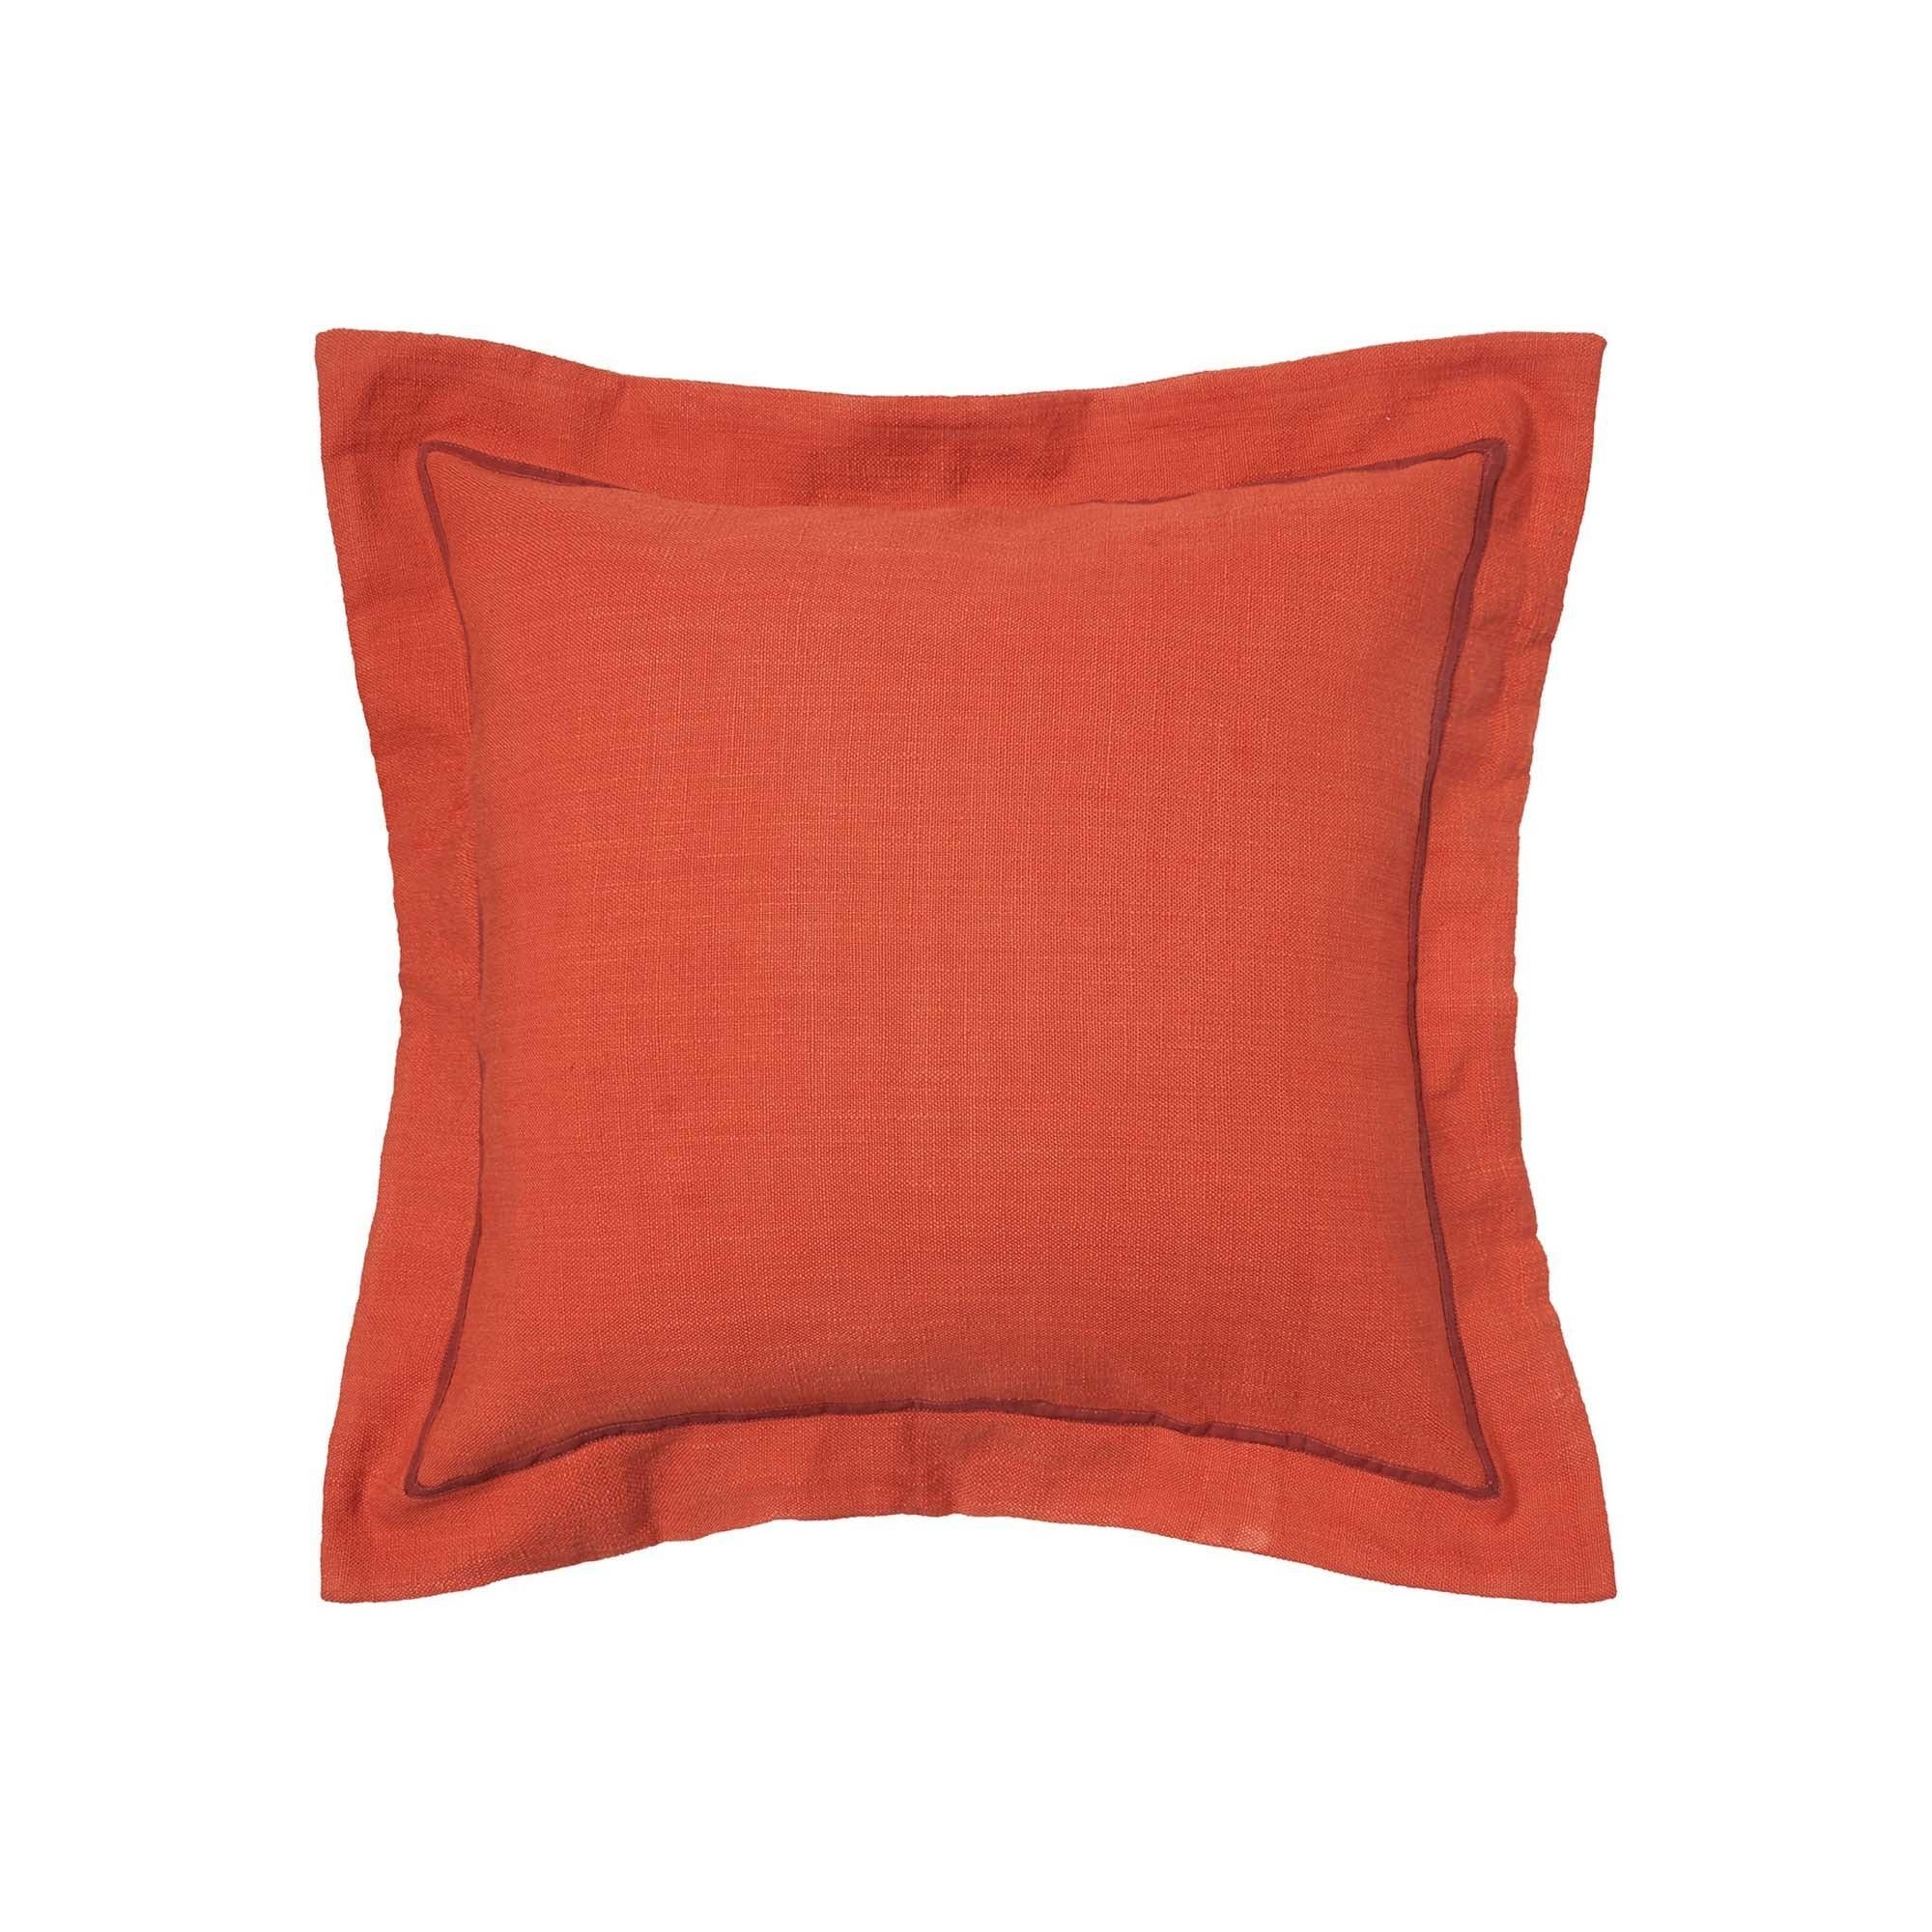 Persimmon Decorative Pillow - Wild Wings